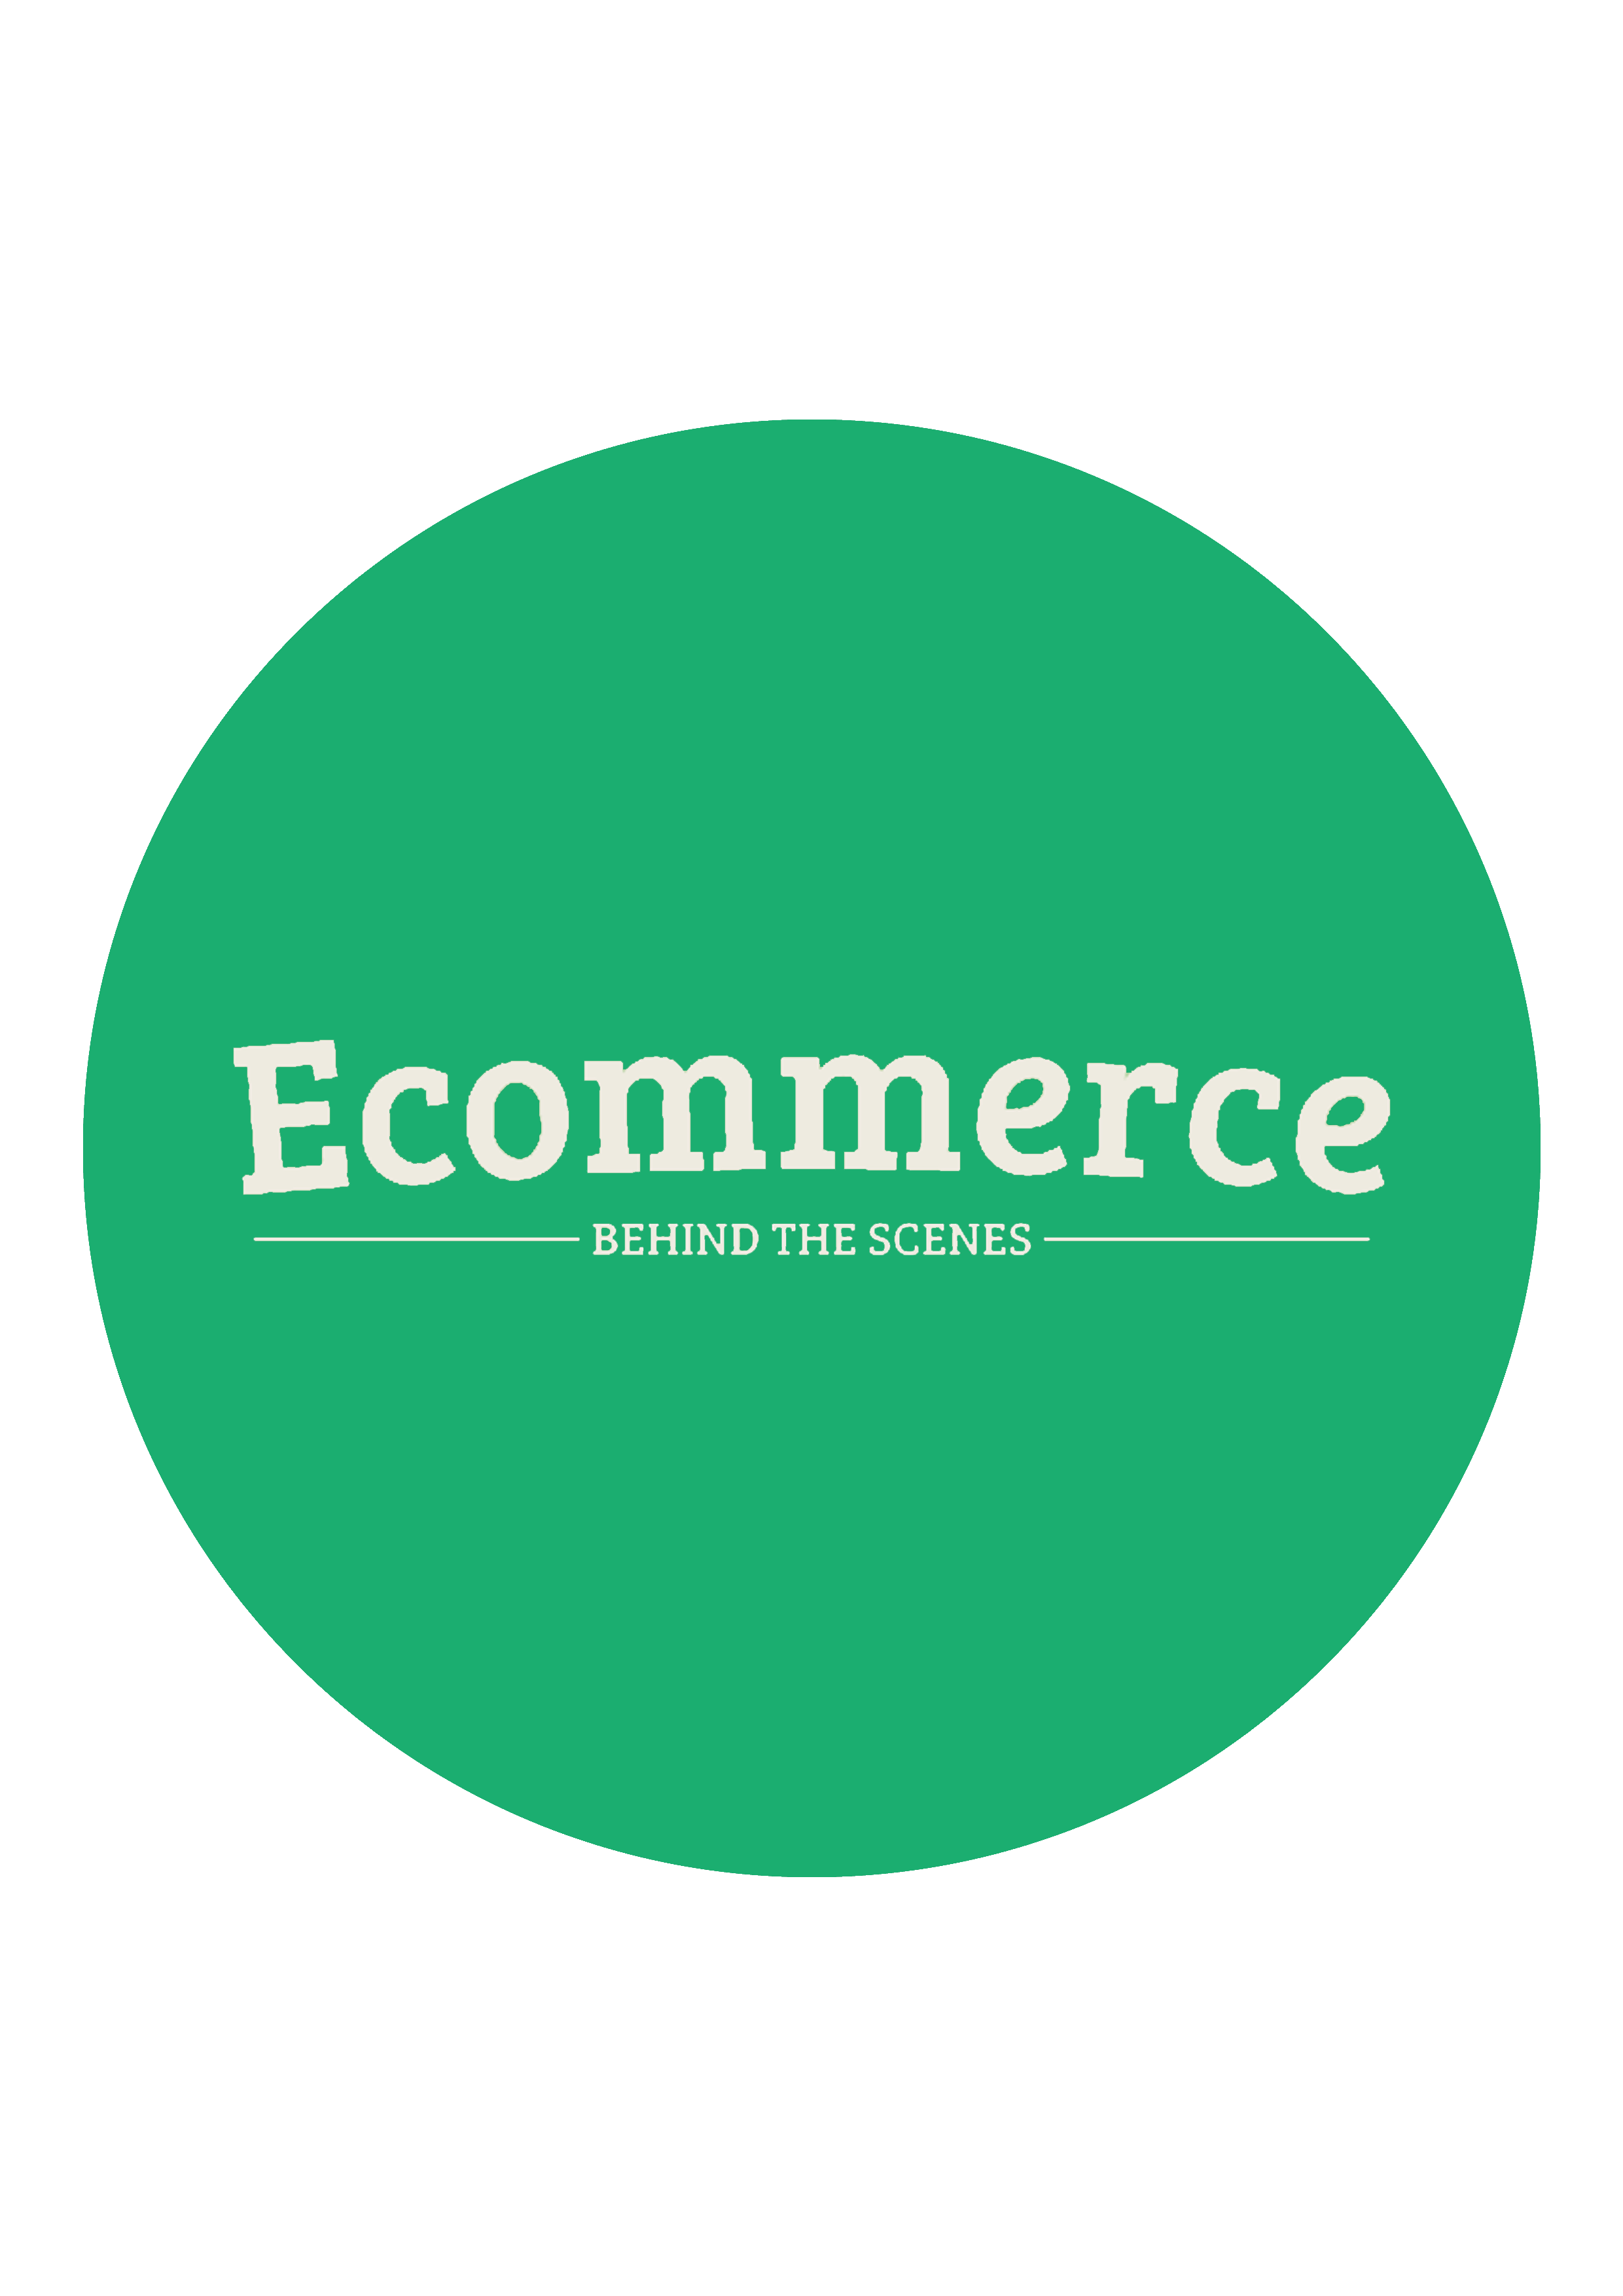 E-commerce: Behind The Scenes